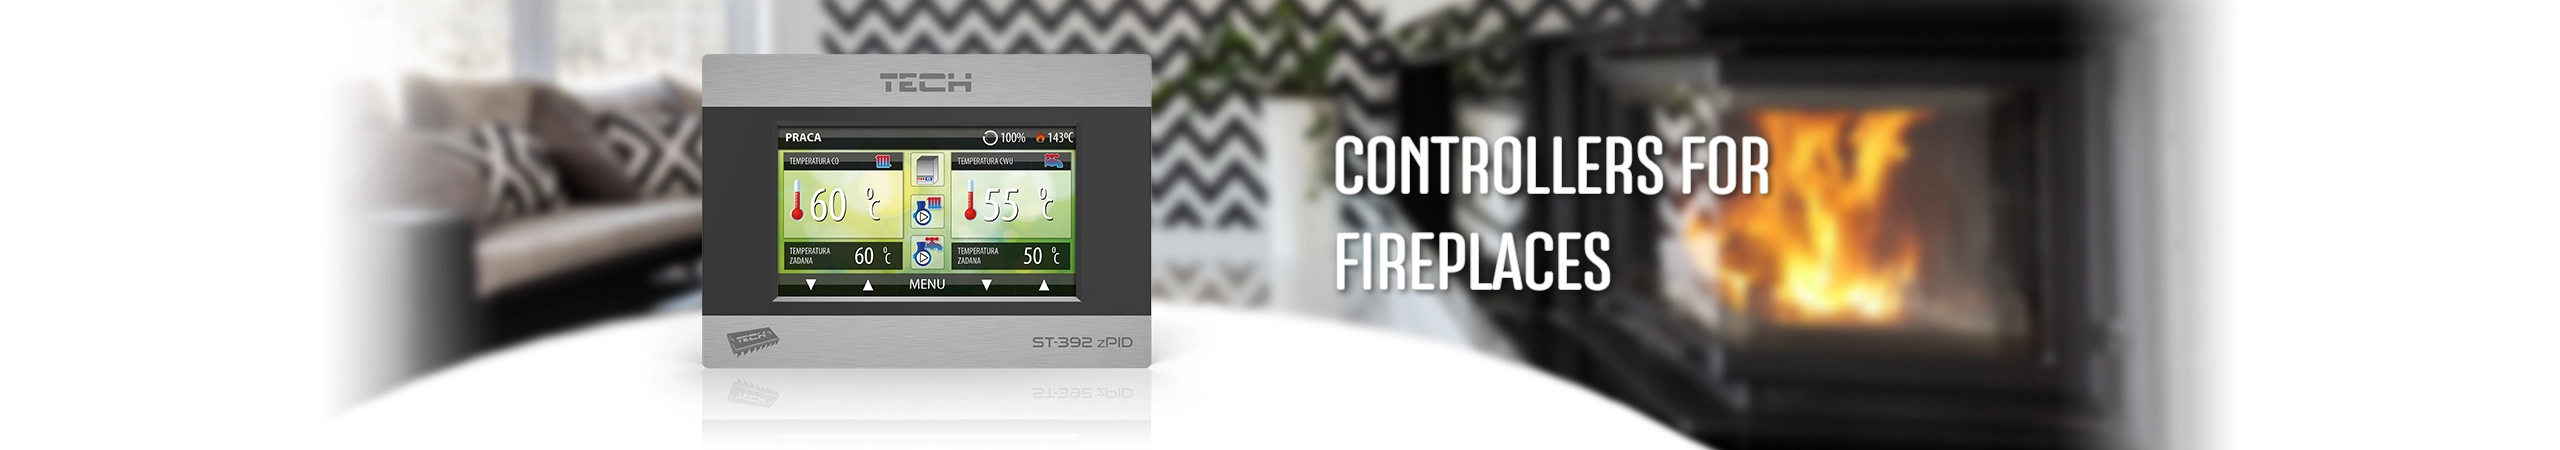 Fireplace controllers - remote thermostat - TECH Controllers